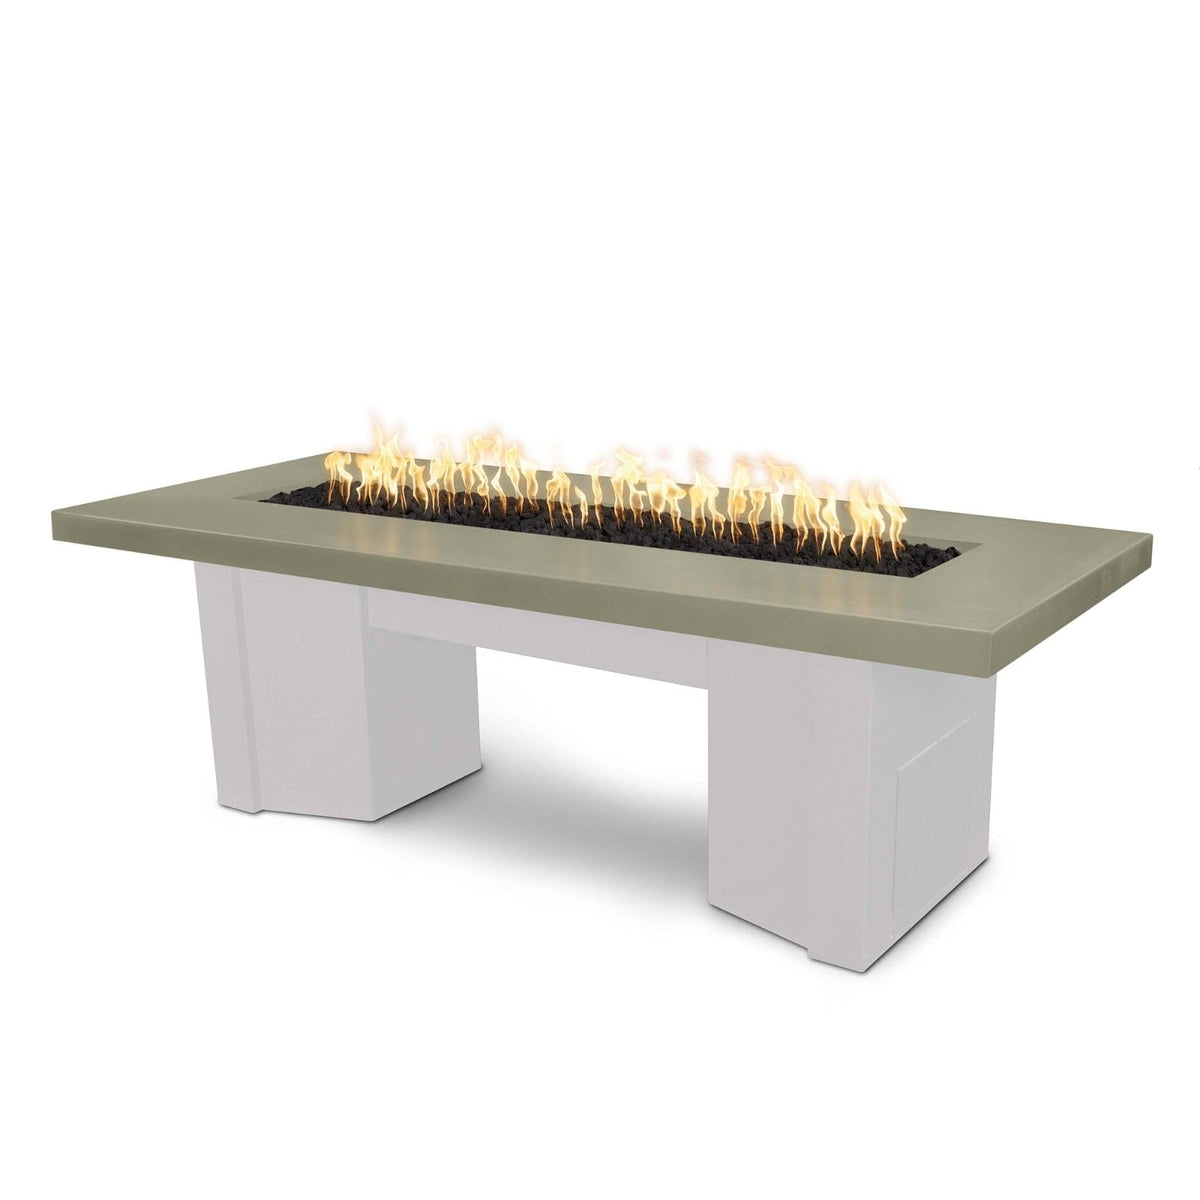 The Outdoor Plus Fire Features Ash (-ASH) / White Powder Coated Steel (-WHT) The Outdoor Plus 78&quot; Alameda Fire Table Smooth Concrete in Natural Gas - Flame Sense System with Push Button Spark Igniter / OPT-ALMGFRC78FSEN-NG